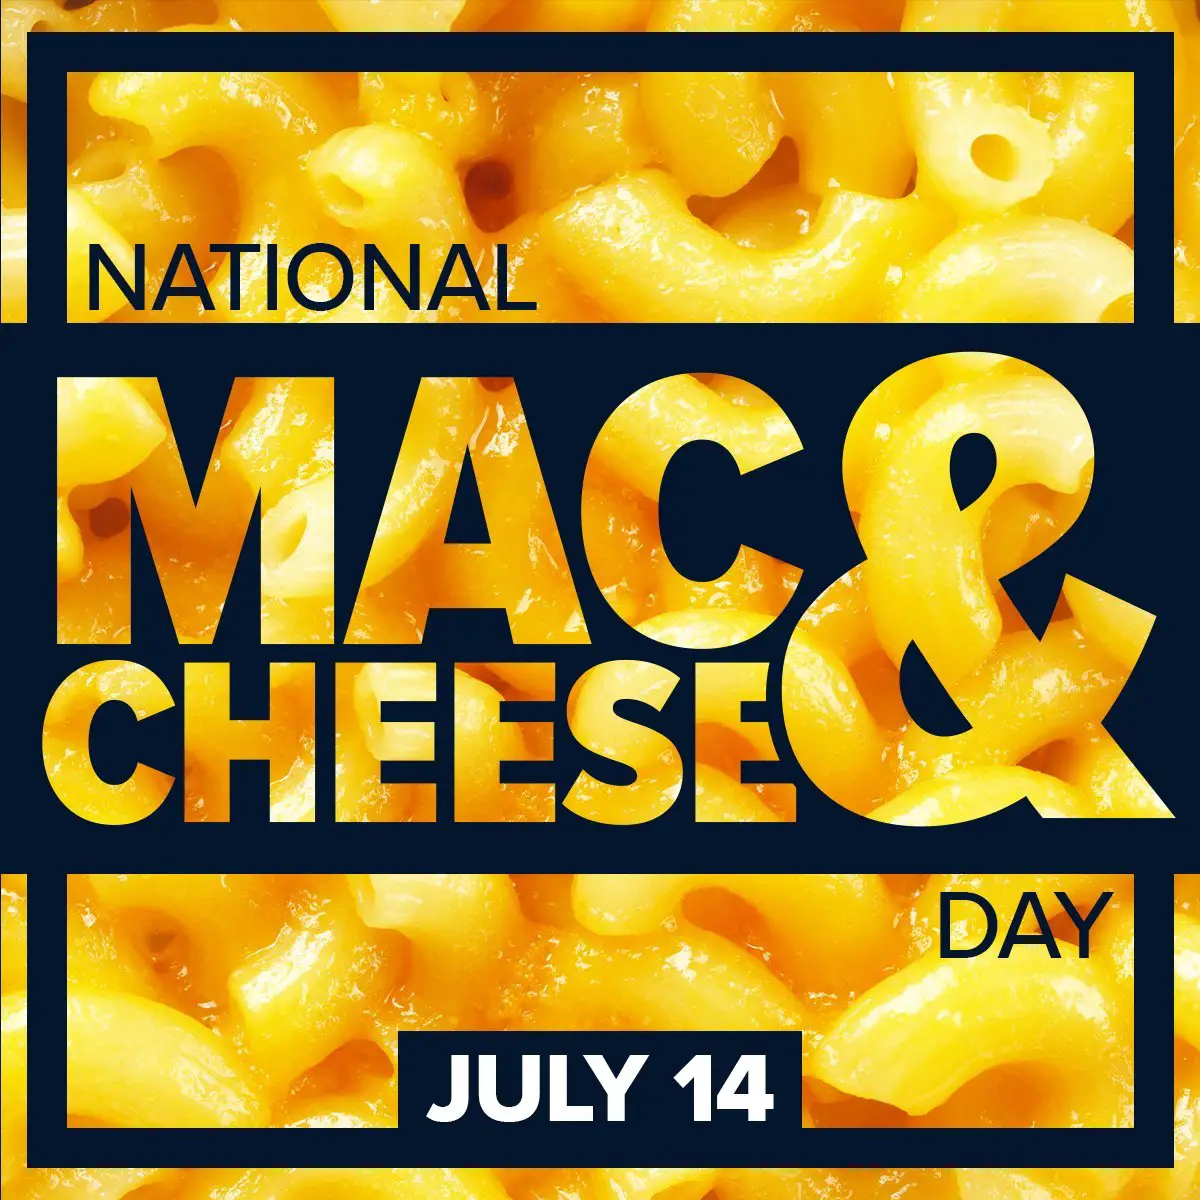 Mac: To all the Mac &  Cheese fans, today we celebrate